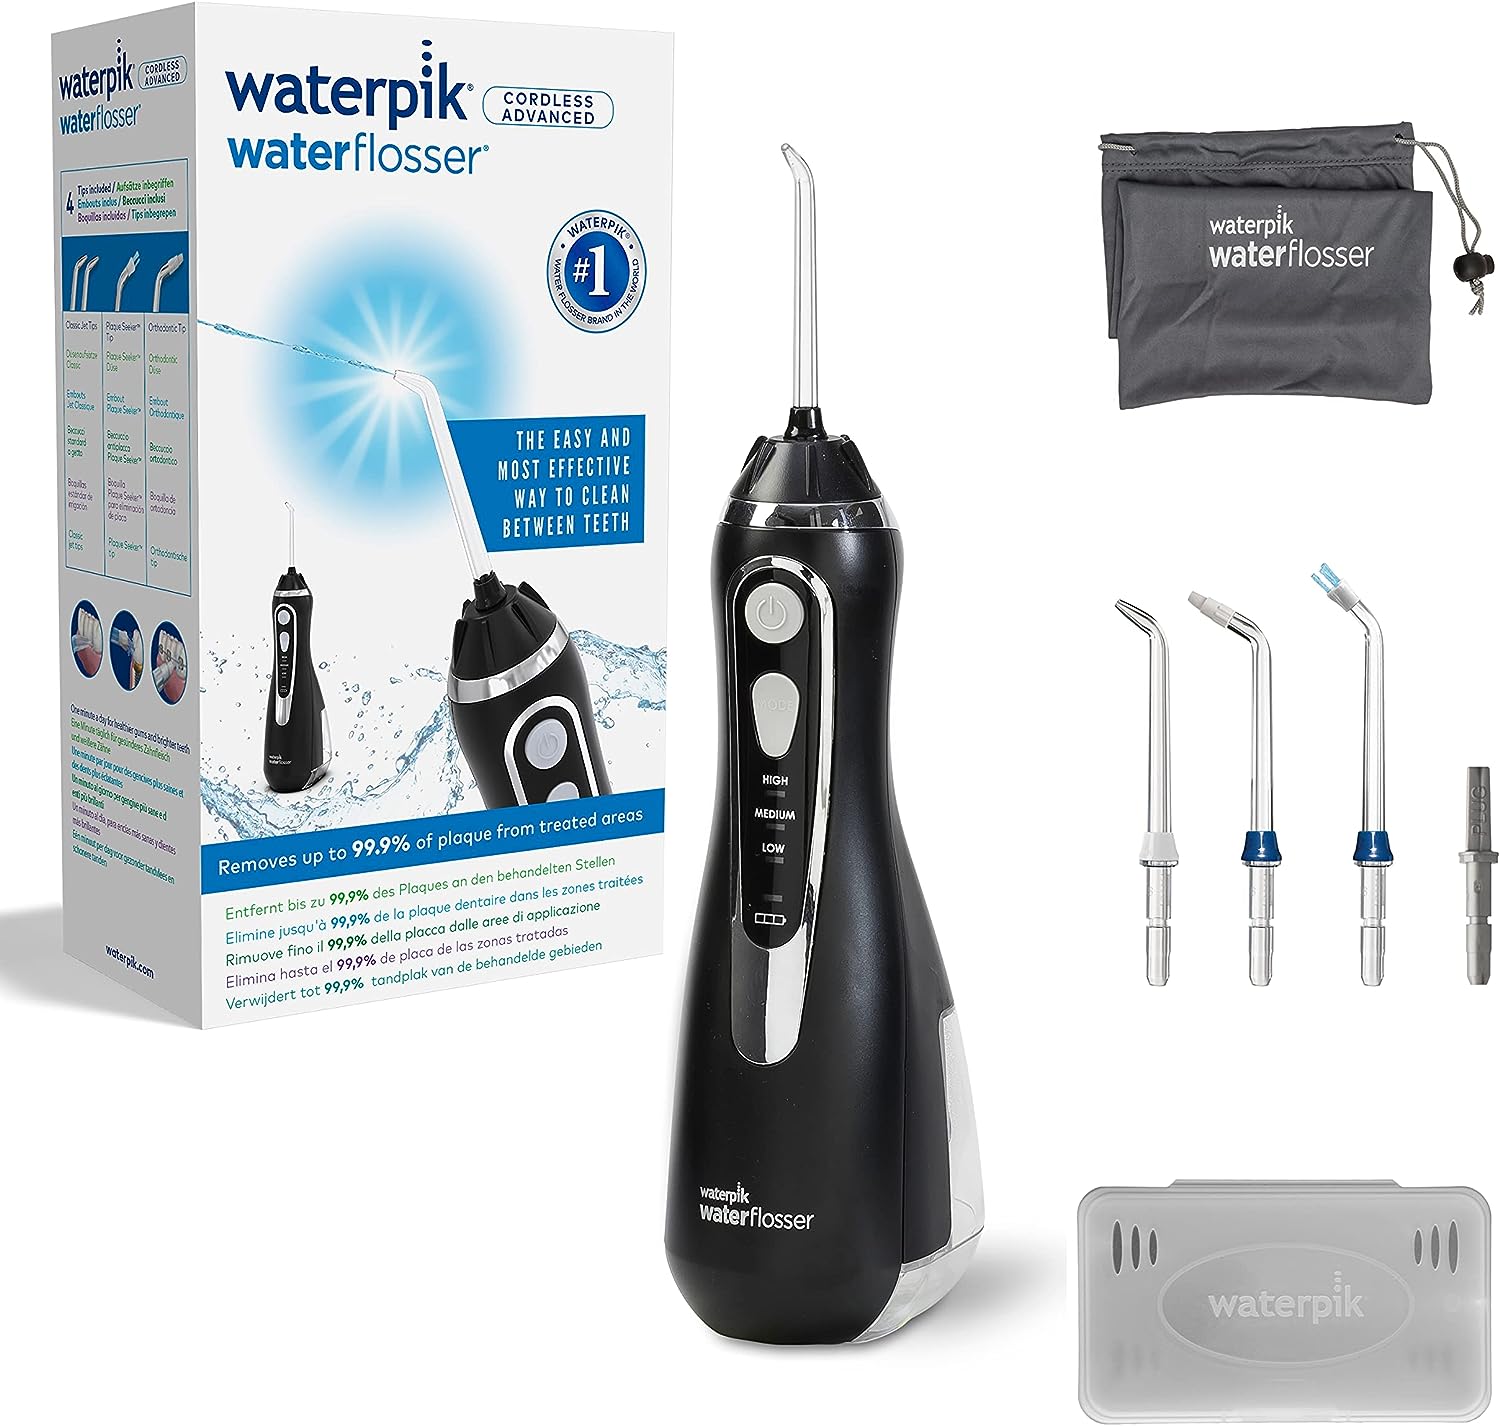 Waterpik Cordless Advanced Water Flosser with 3 Pressure Settings, Dental Plaque Removal Tool Ideal 